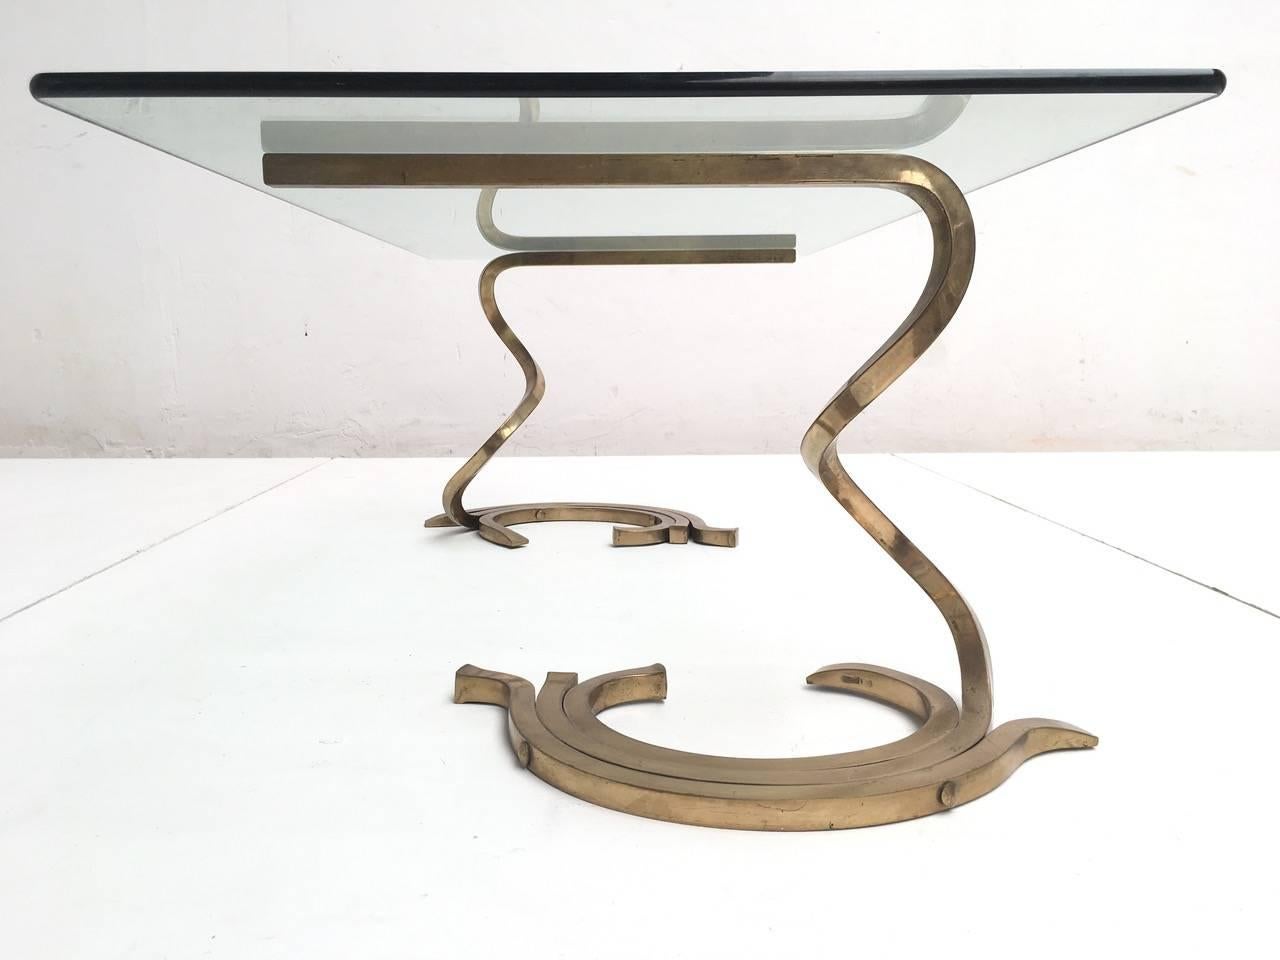 Italian Stunning Sculptural Serpentine Form Coffee Table, Solid Brass Bar, Italy, 1970